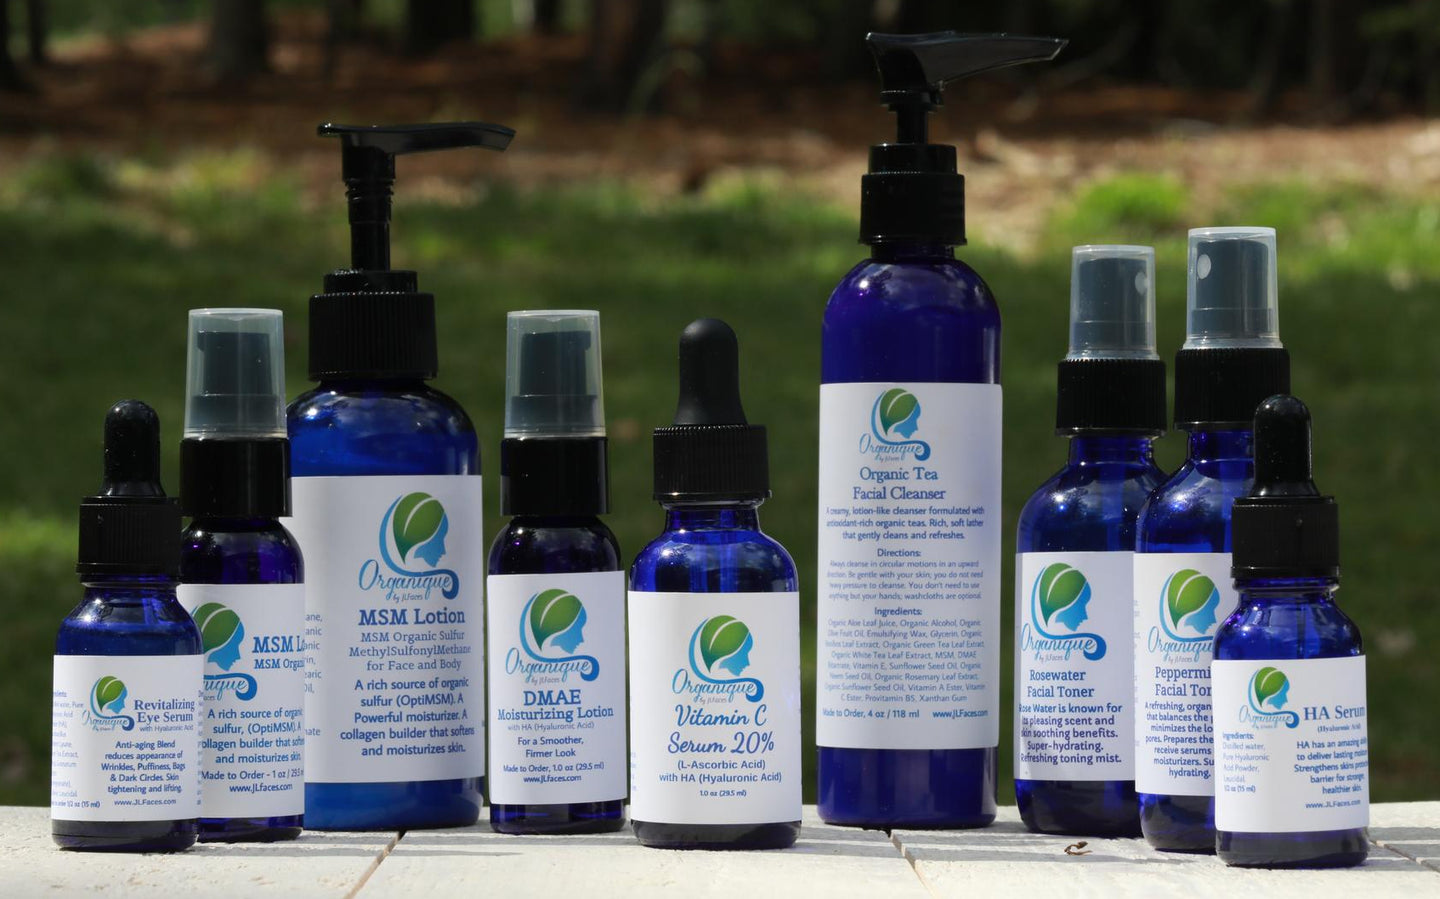 Welcome to high-quality, organic, anti-aging skincare that won't burn a hole in your pocket :)